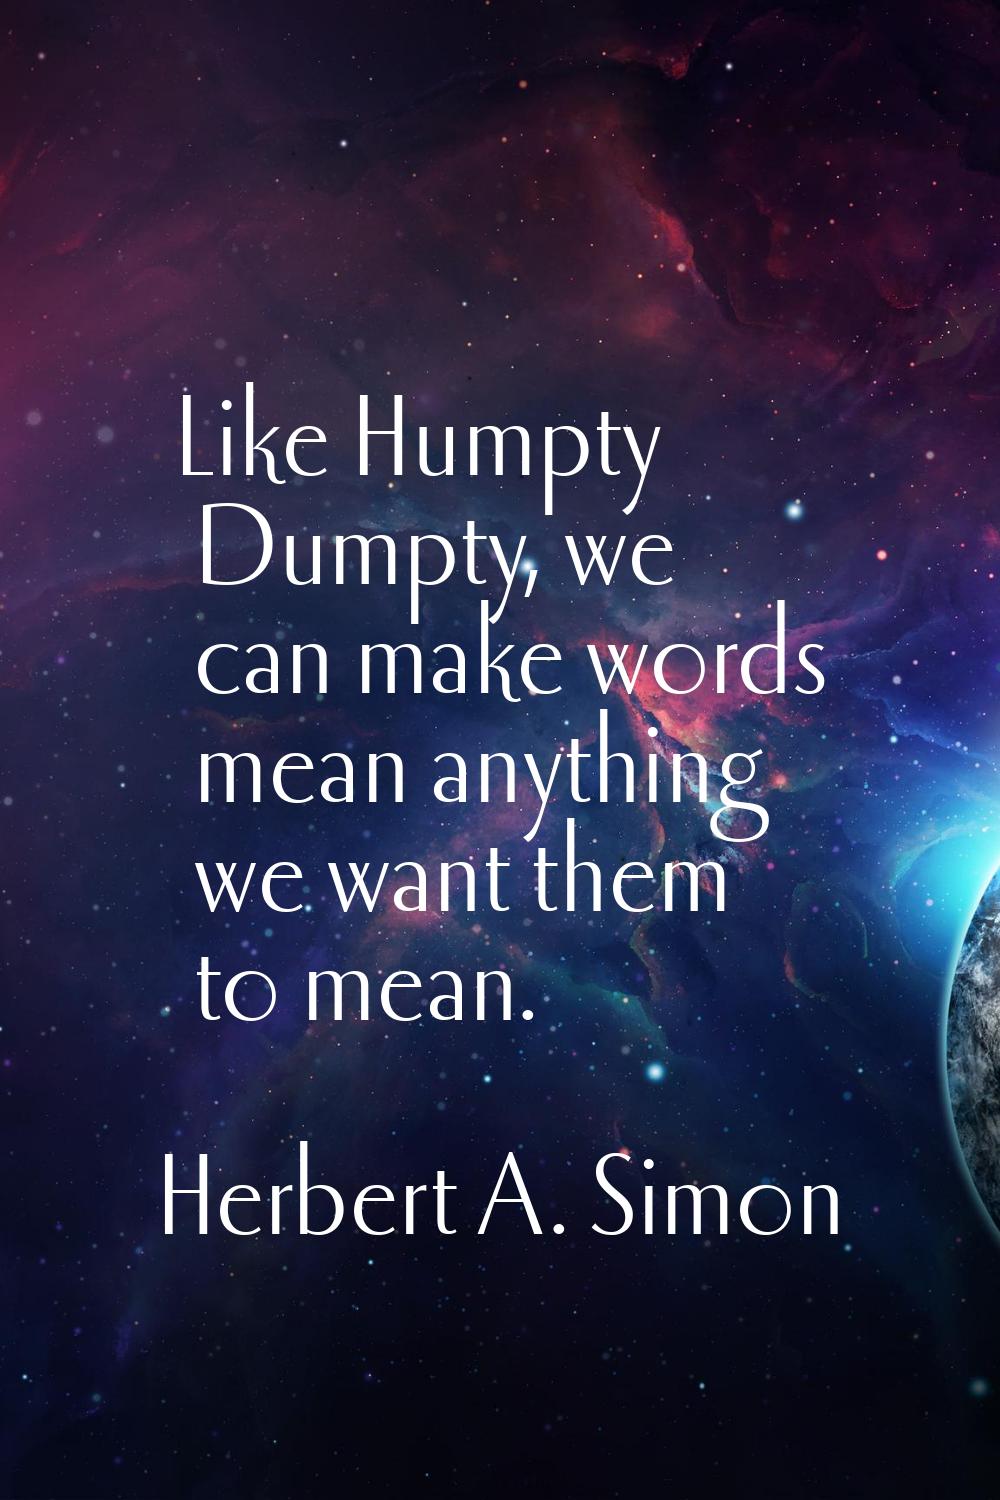 Like Humpty Dumpty, we can make words mean anything we want them to mean.